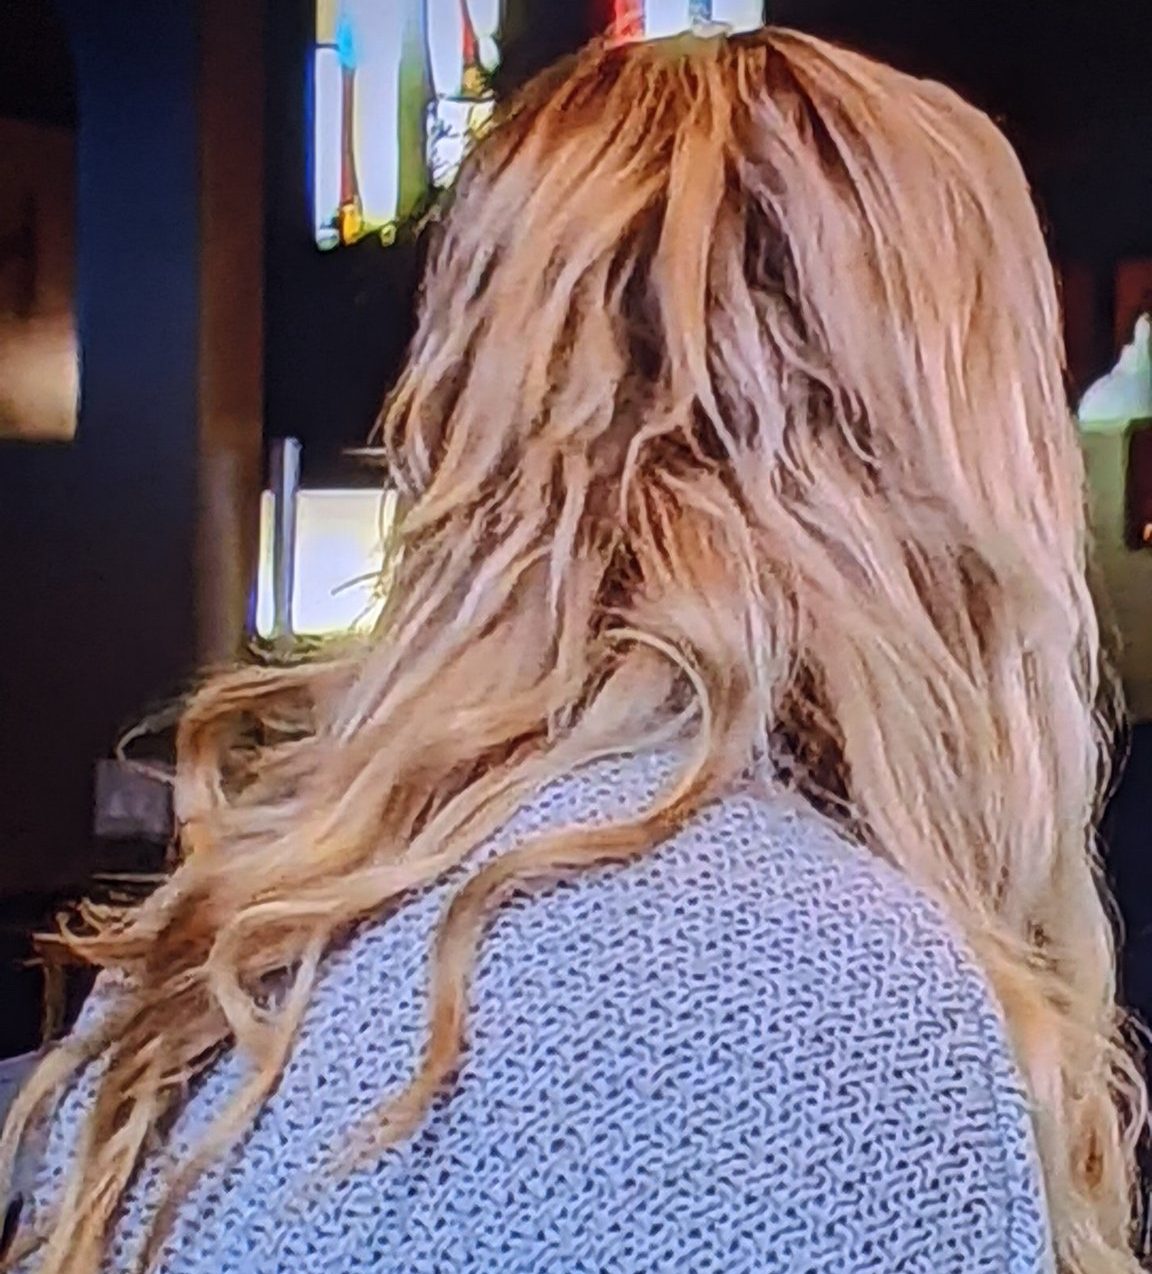 Gina Kirschenheiter Warns Her “Hair Only Gets Worse This Season” On Real Housewives Of Orange County